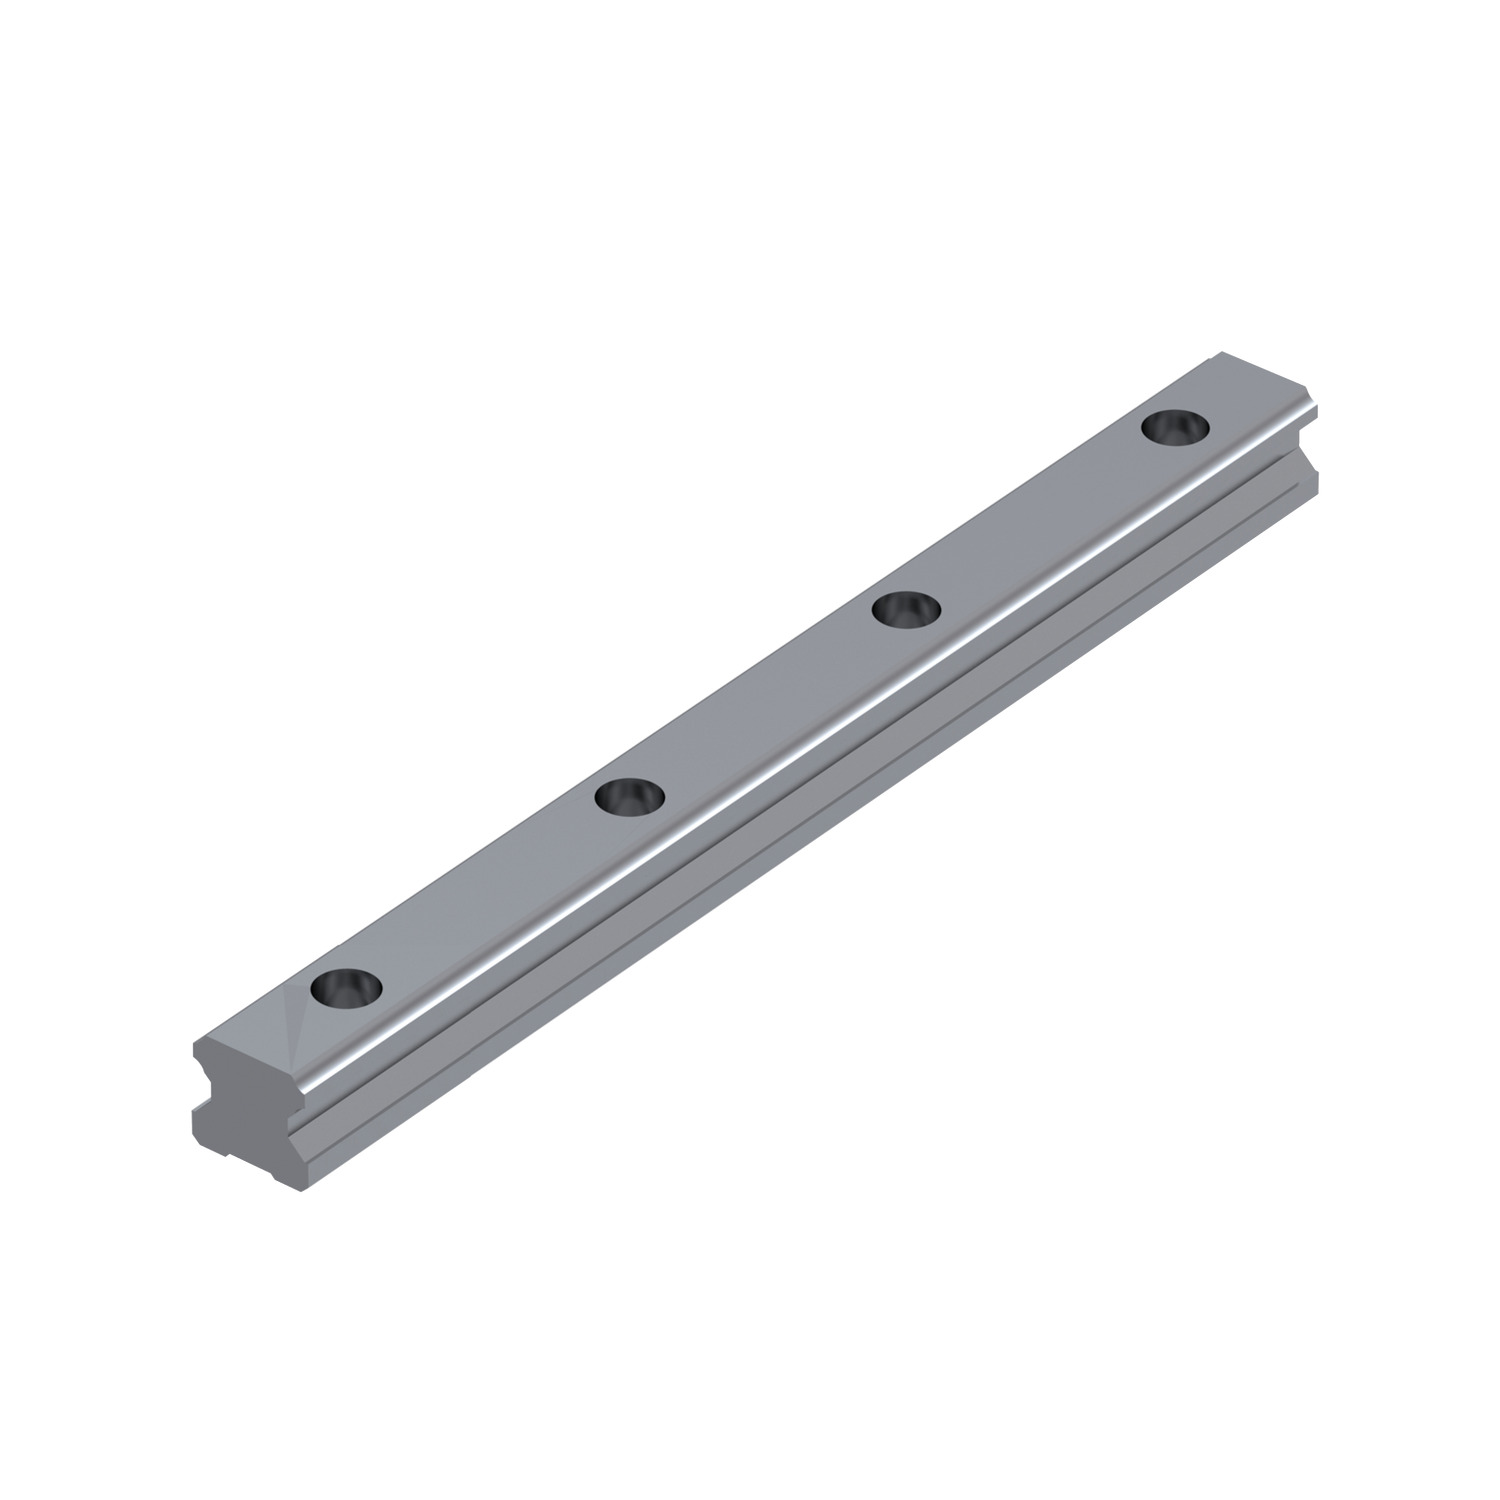 L1016.20-2680 Linear guide rail 20mm 2680 Hardened and ground steel. EC:20163525 WG:05063055289665